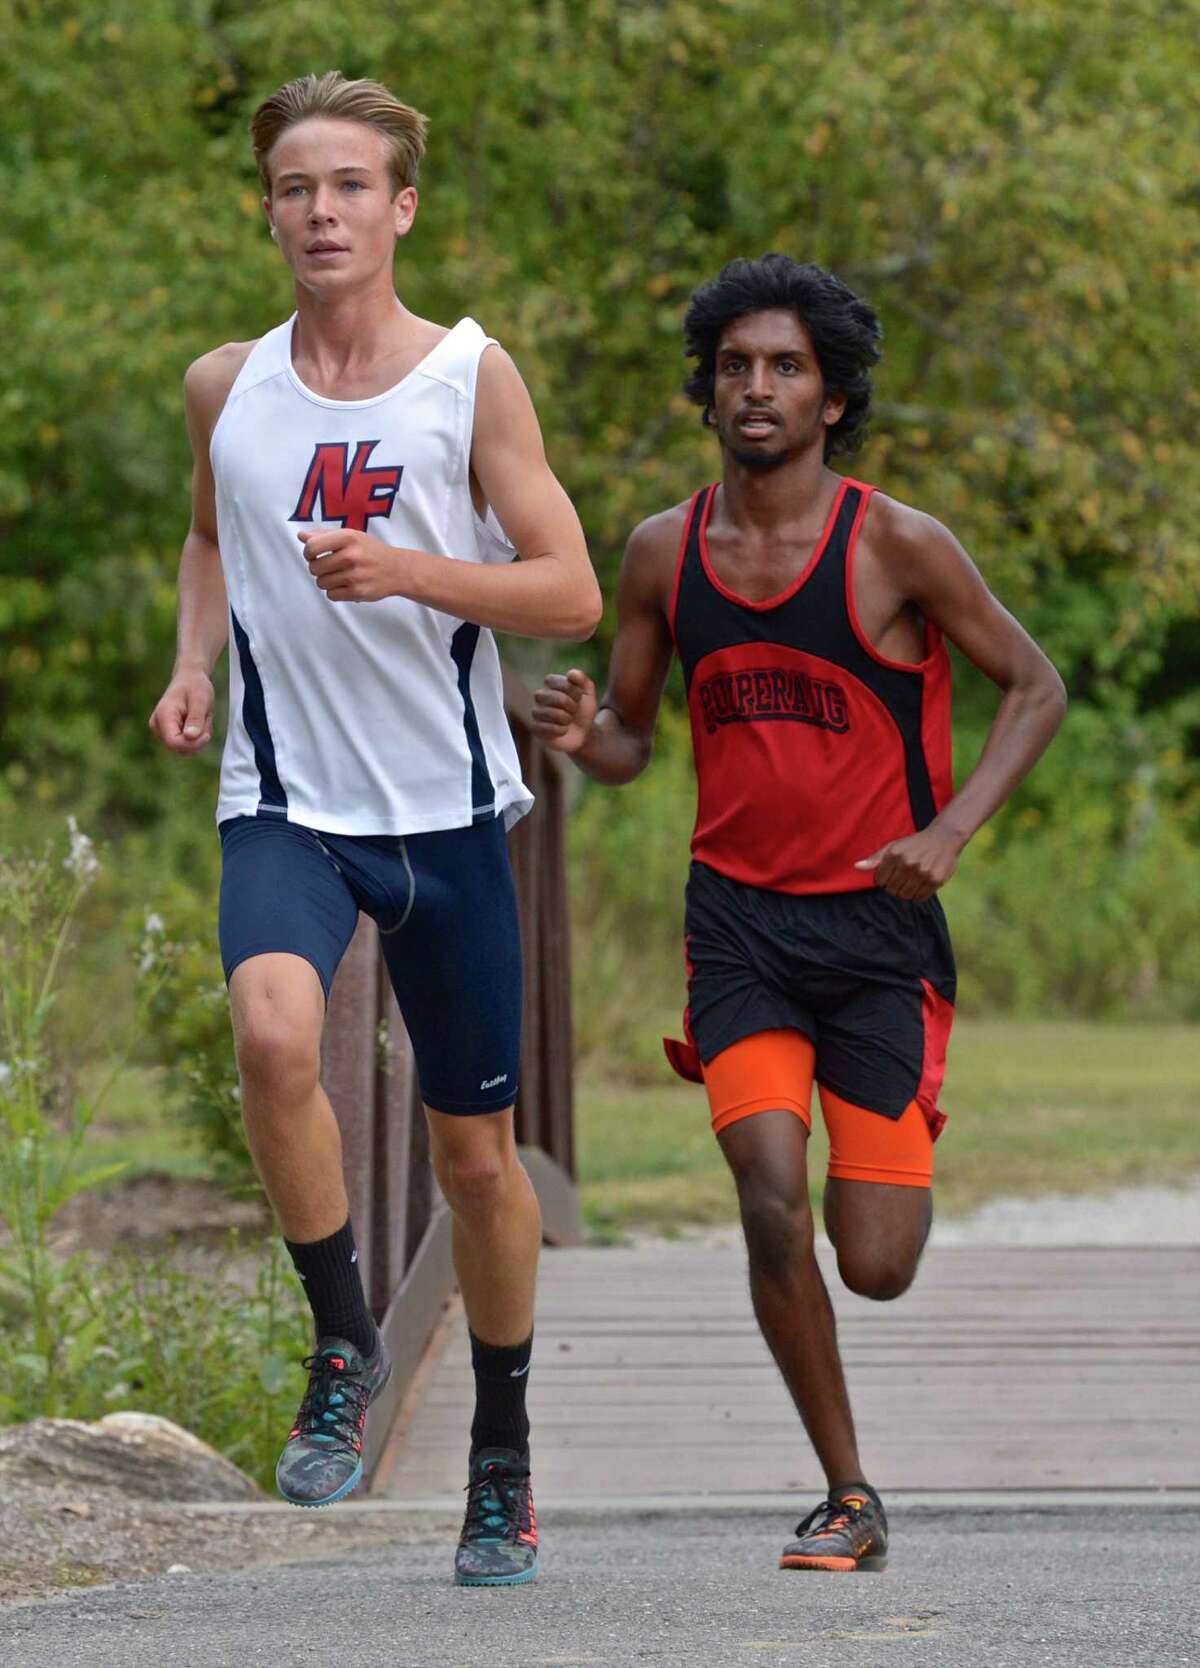 New Fairfield's Michael Rautter, left, won and Pomperaug's Alexander Abraham finished second in the boys high school cross country meet between New Fairfield, Pomperaug, New Milford and Masuk high schools on Tuesday afternoon, September 22, 2015, at Great Hollow Lake at Wolfe park, in Monroe, Conn.